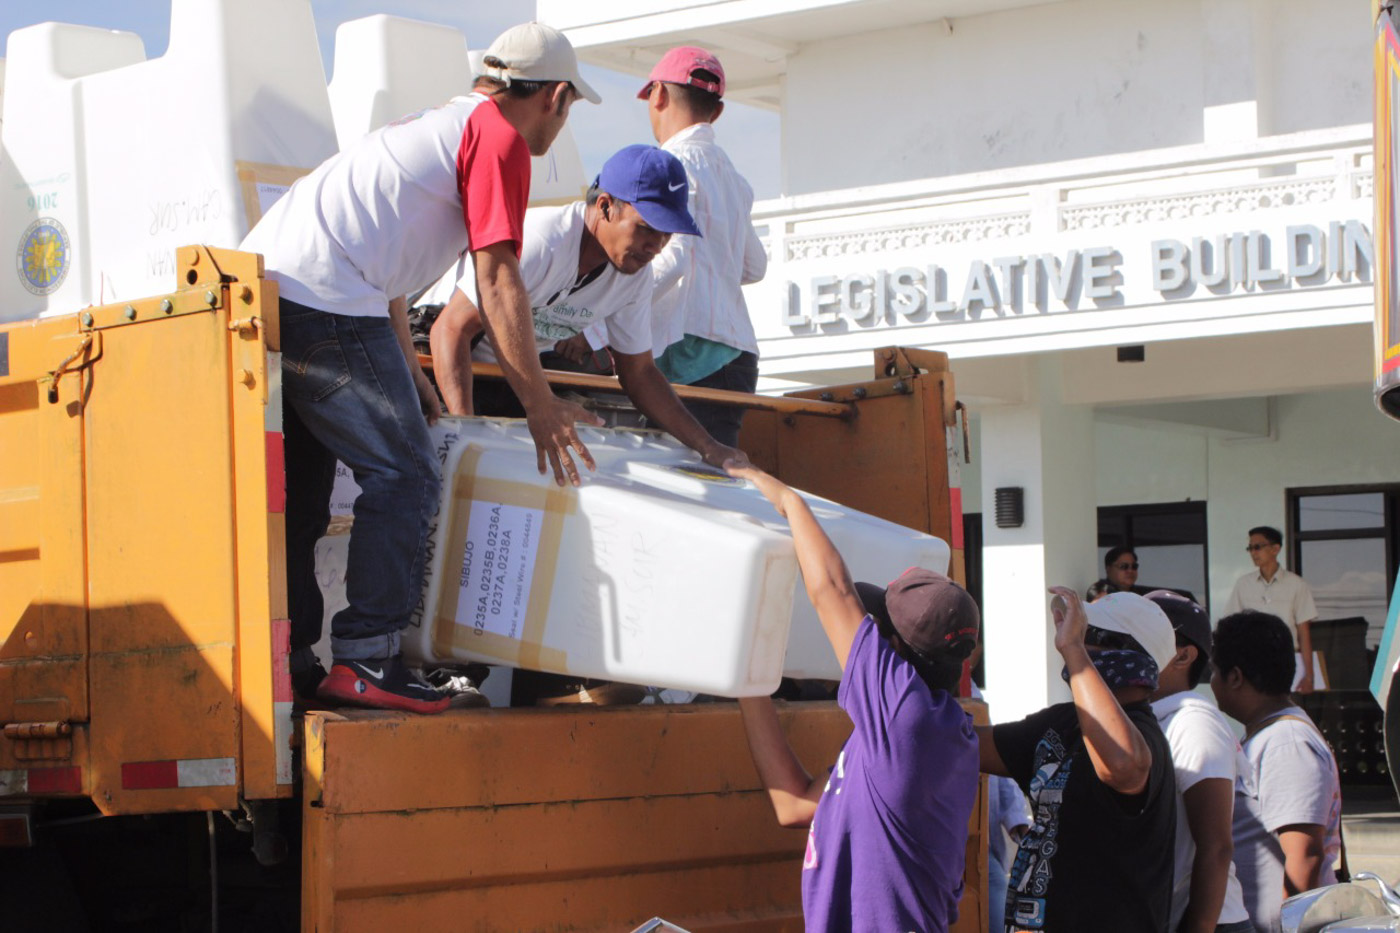 BALLOTS. Men transfer ballot boxes from a truck to the Legislative Building in Pili, Camarines Sur where representatives from the Supreme Court are waiting for them. File photo from the Office of the Vice President 